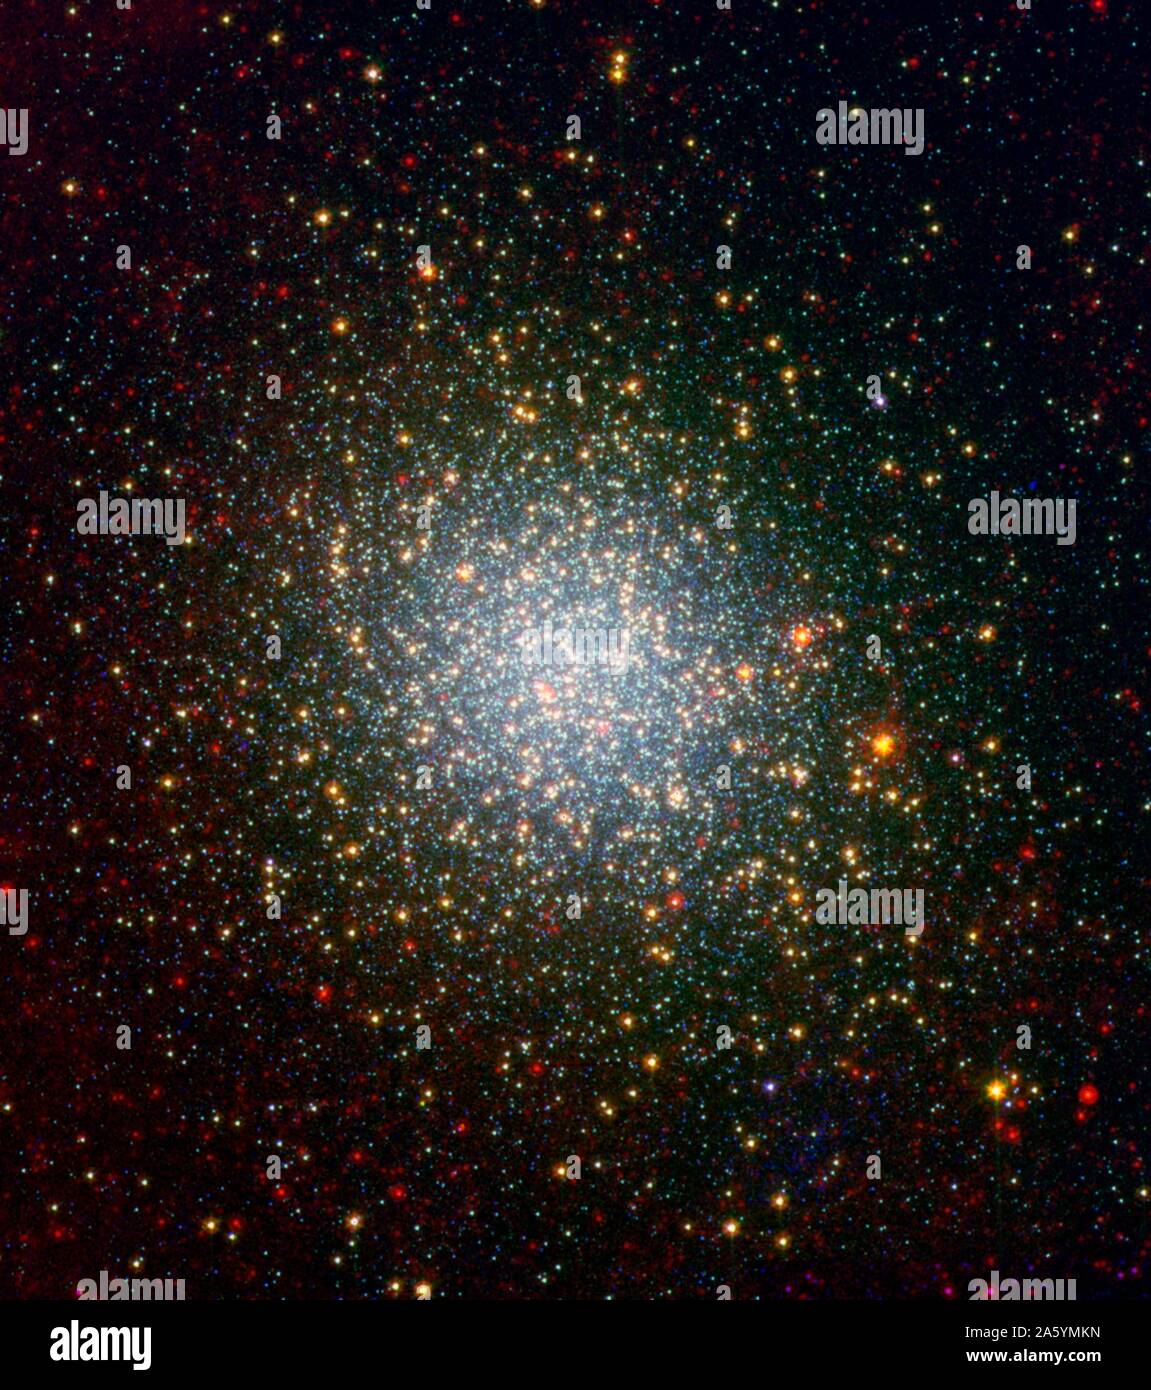 A cluster brimming with millions of stars glistens like an iridescent opal in this image from NASA's Spitzer Space Telescope. Called Omega Centauri, the sparkling orb of stars is like a miniature galaxy Stock Photo